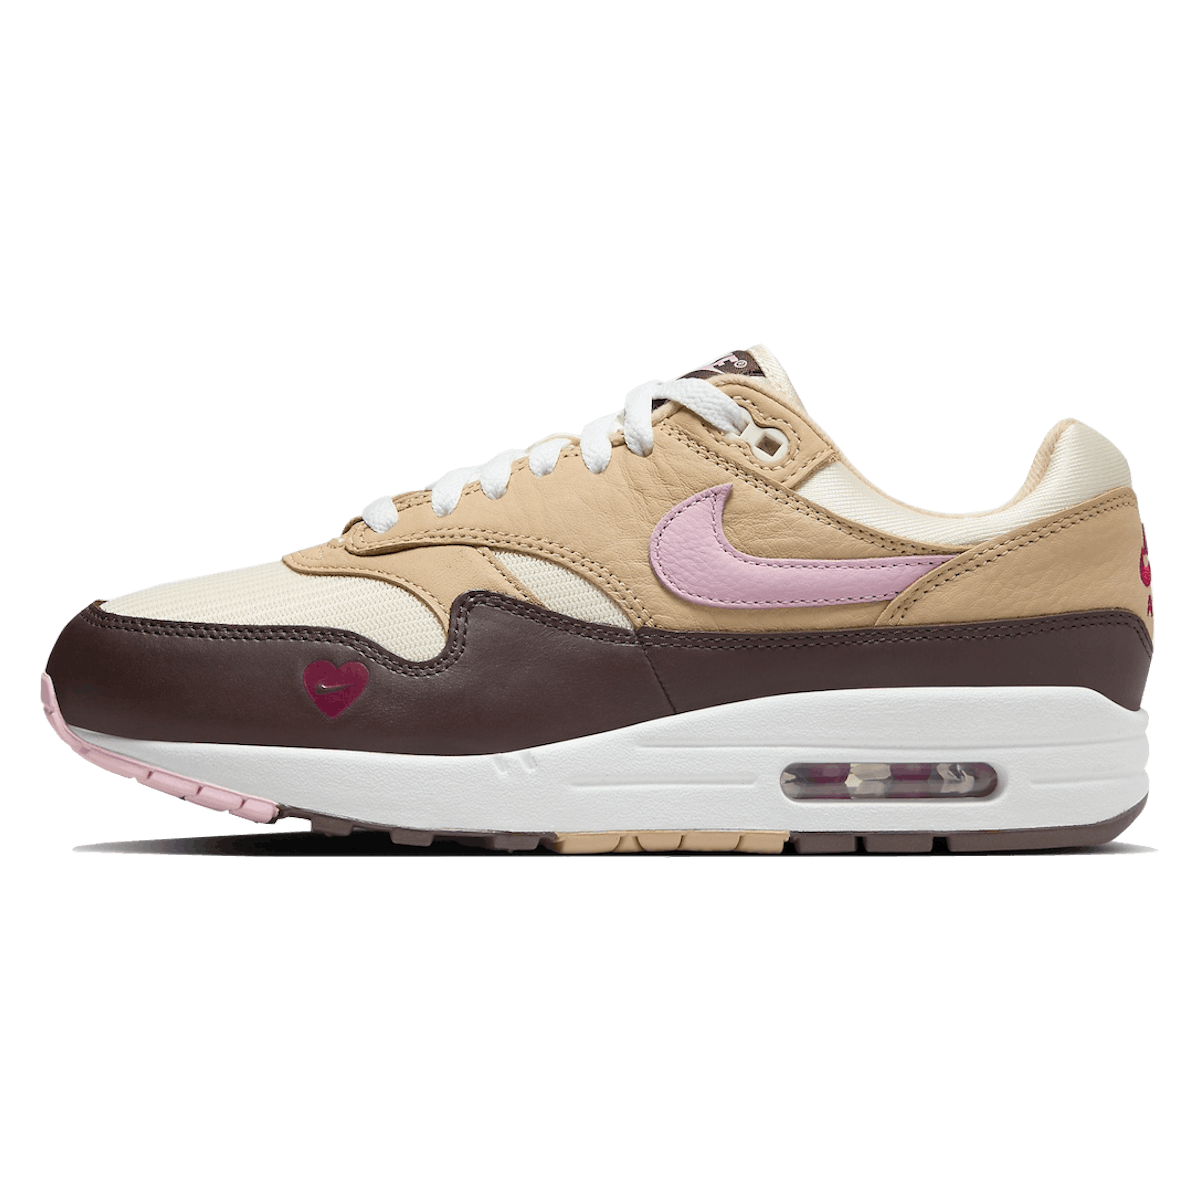 Nike Air Max 1 '87 Wmns "Valentine’s Day"